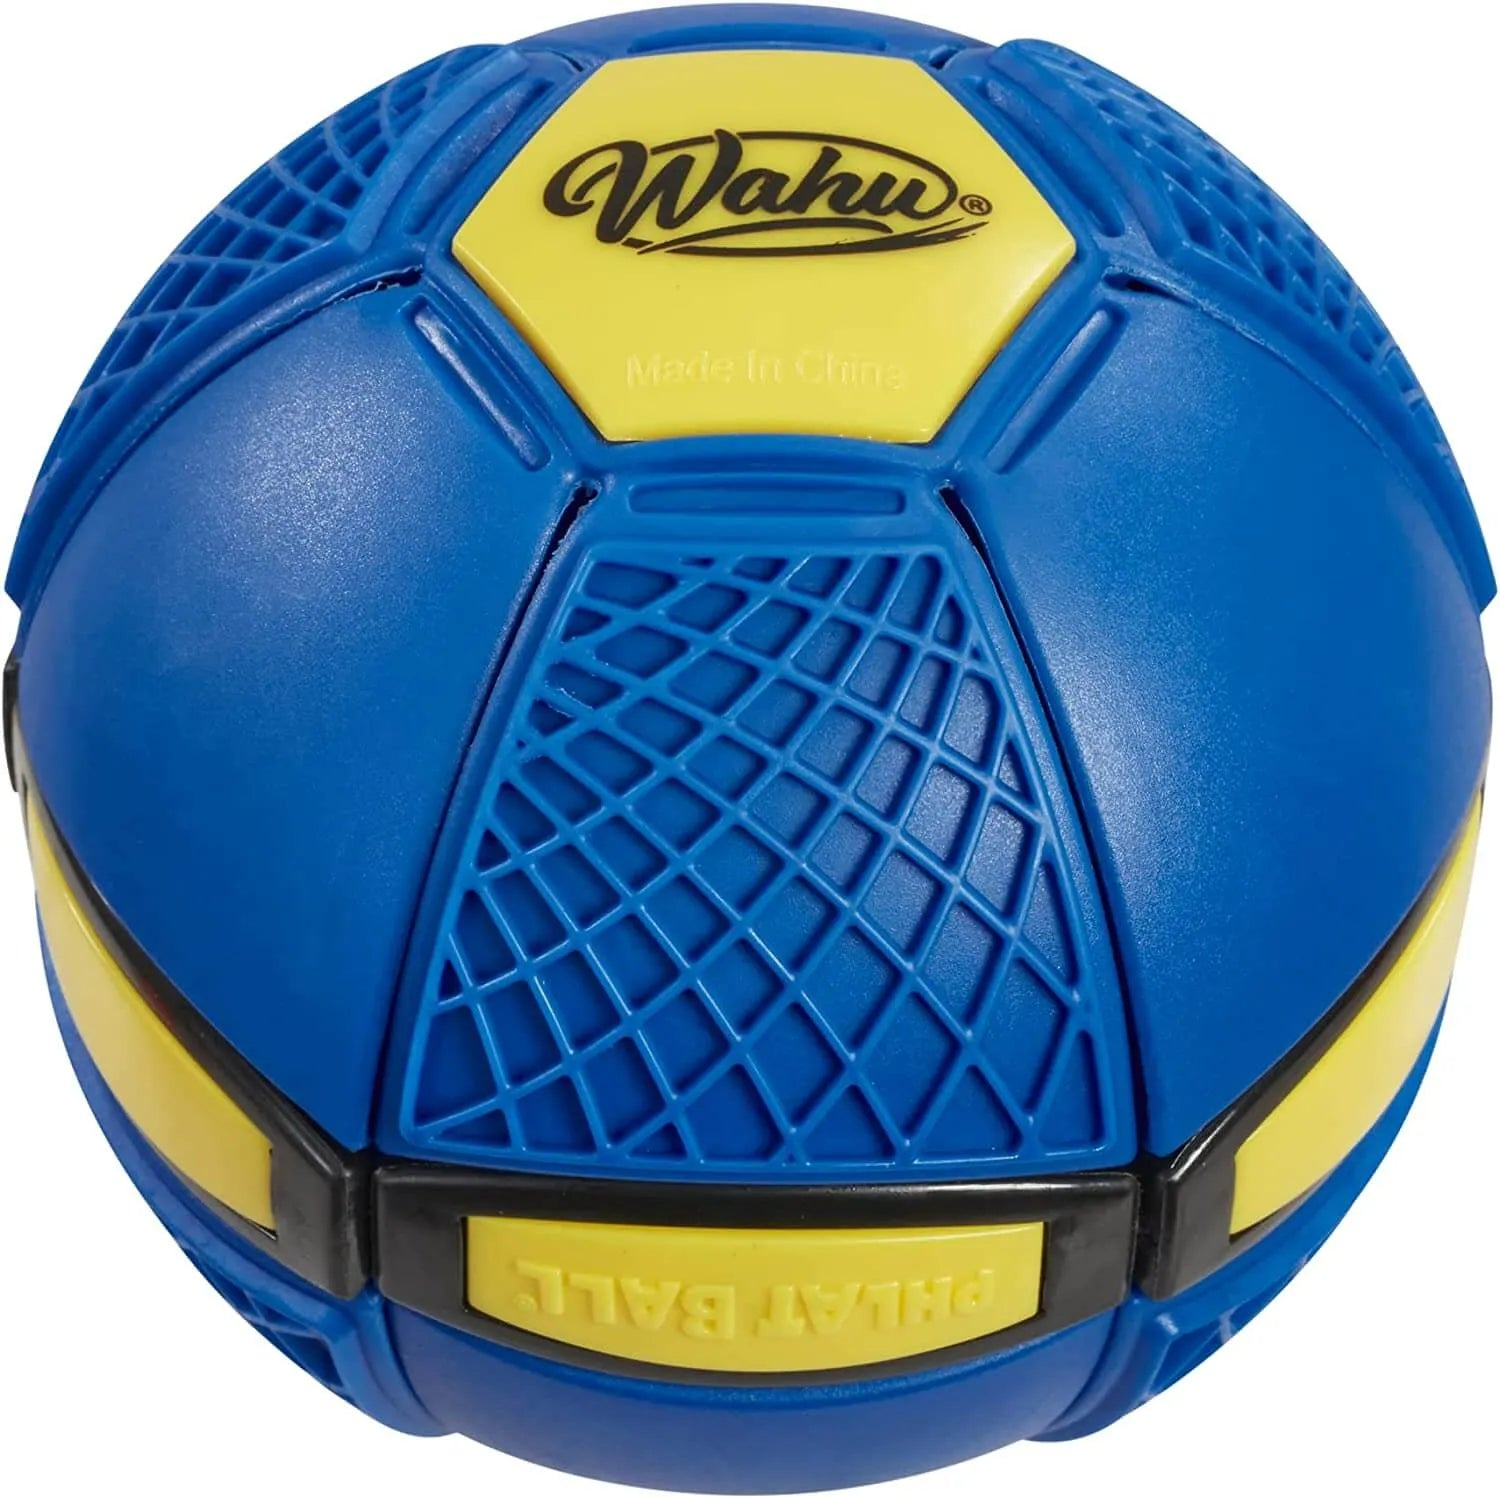 Wahu Phlat Ball Junior turns from a disc to a ball - Vivid Golaith toys for children